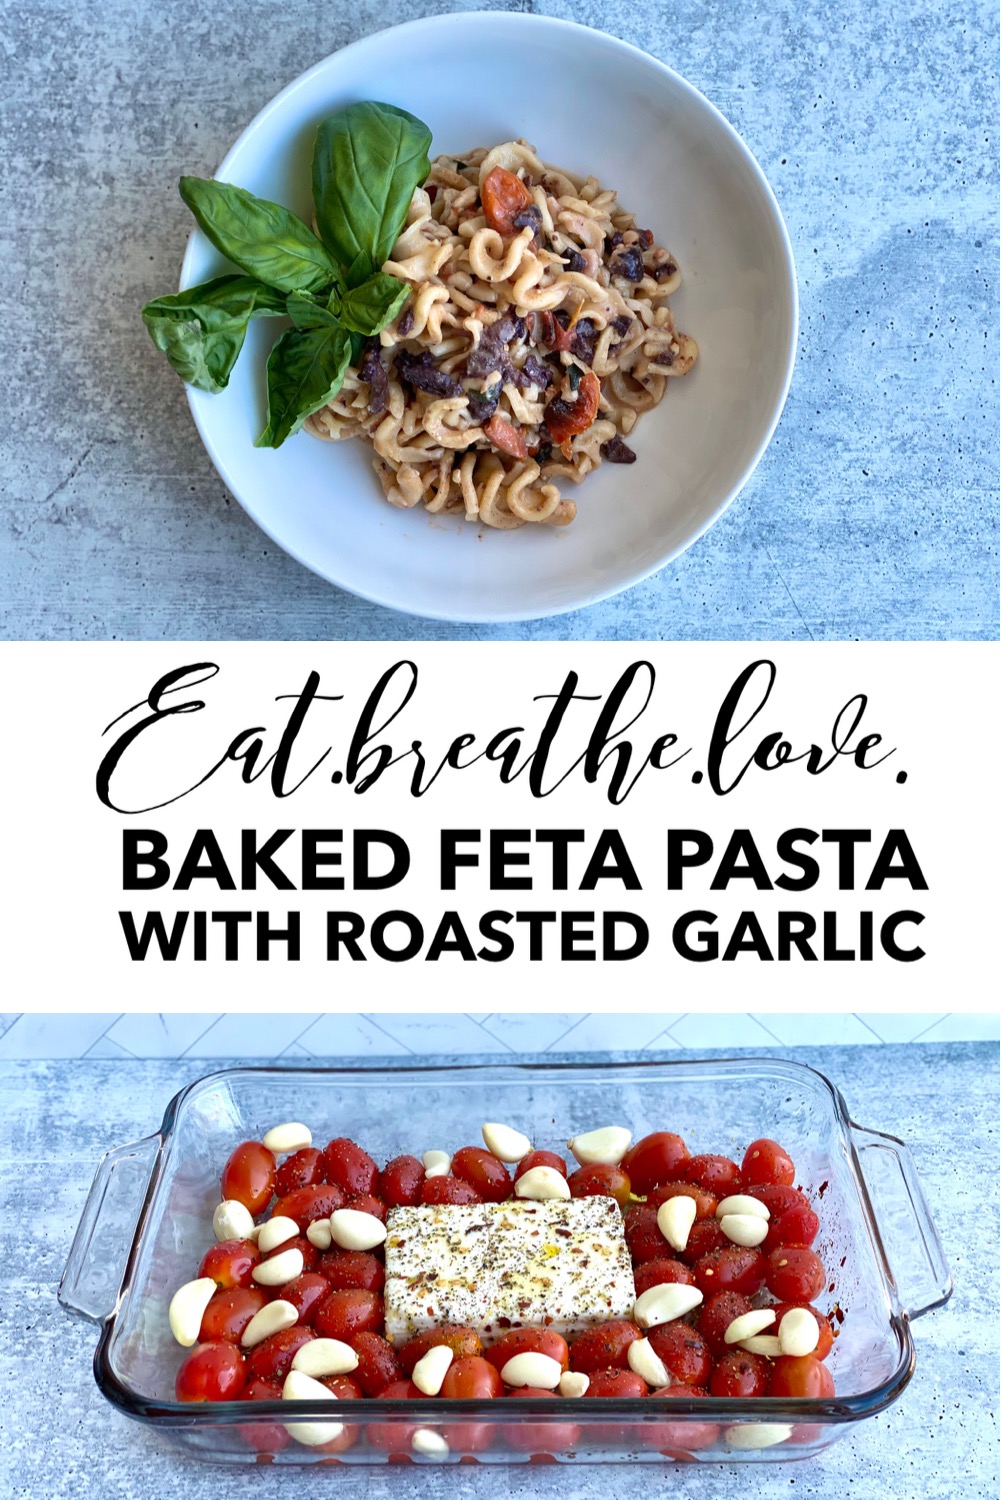 Image of pasta in a bowl and baking dish with feta and tomatoes